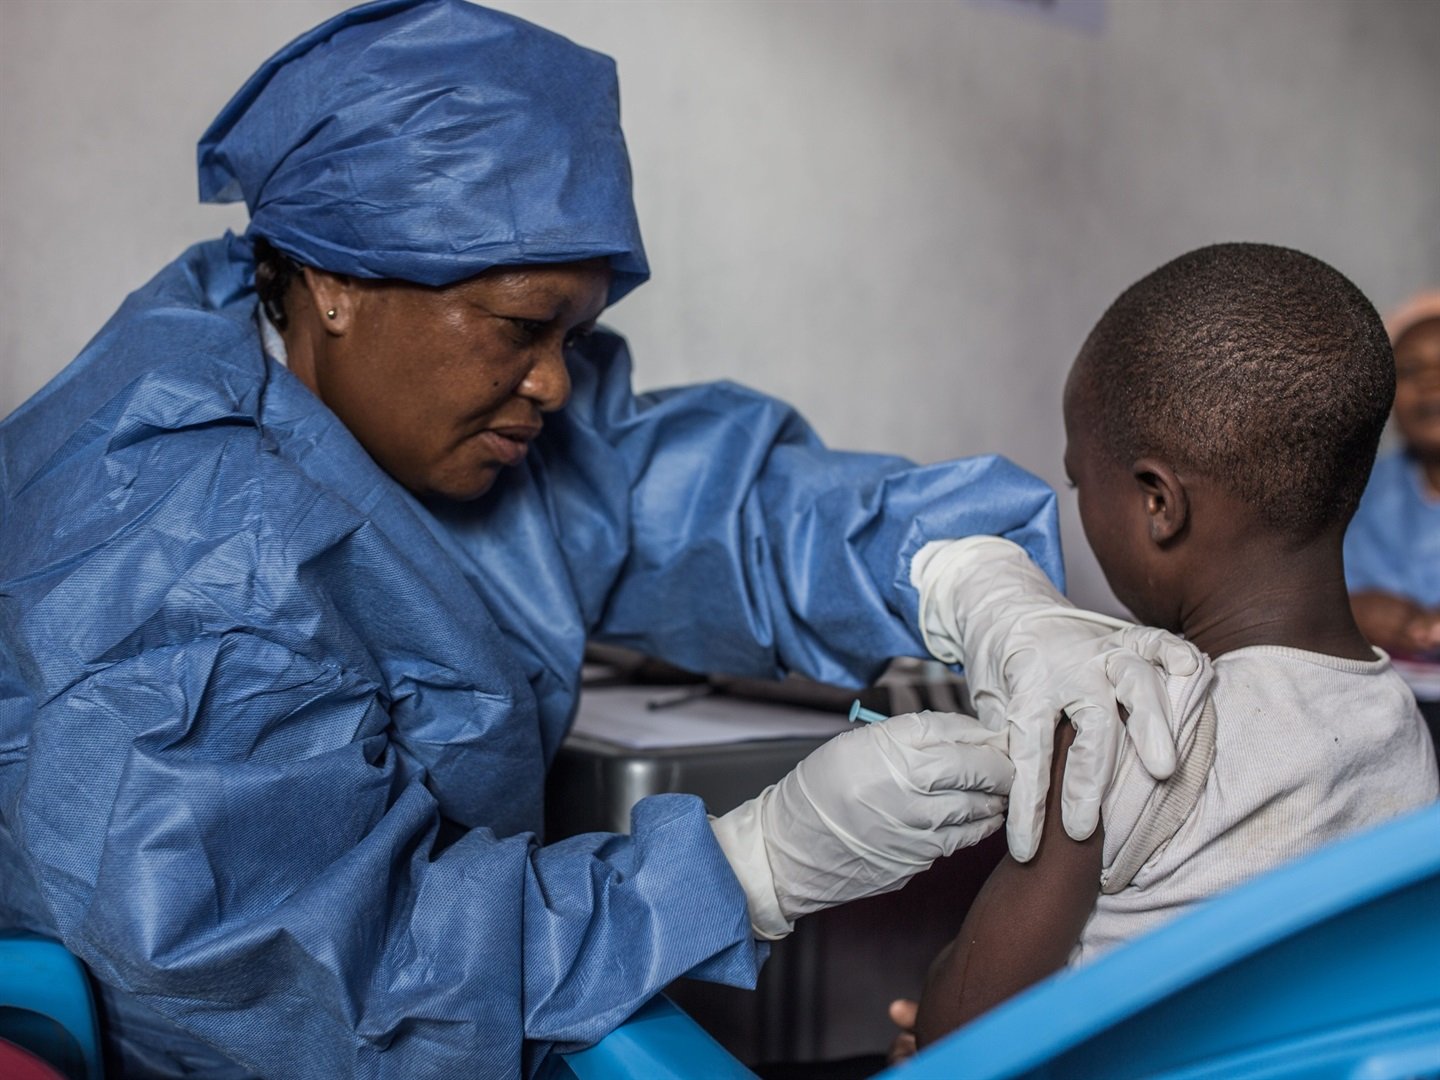 A girl gets inoculated with an Ebola vaccine in Goma, the Democratic Republic of the Congo, in 2019.